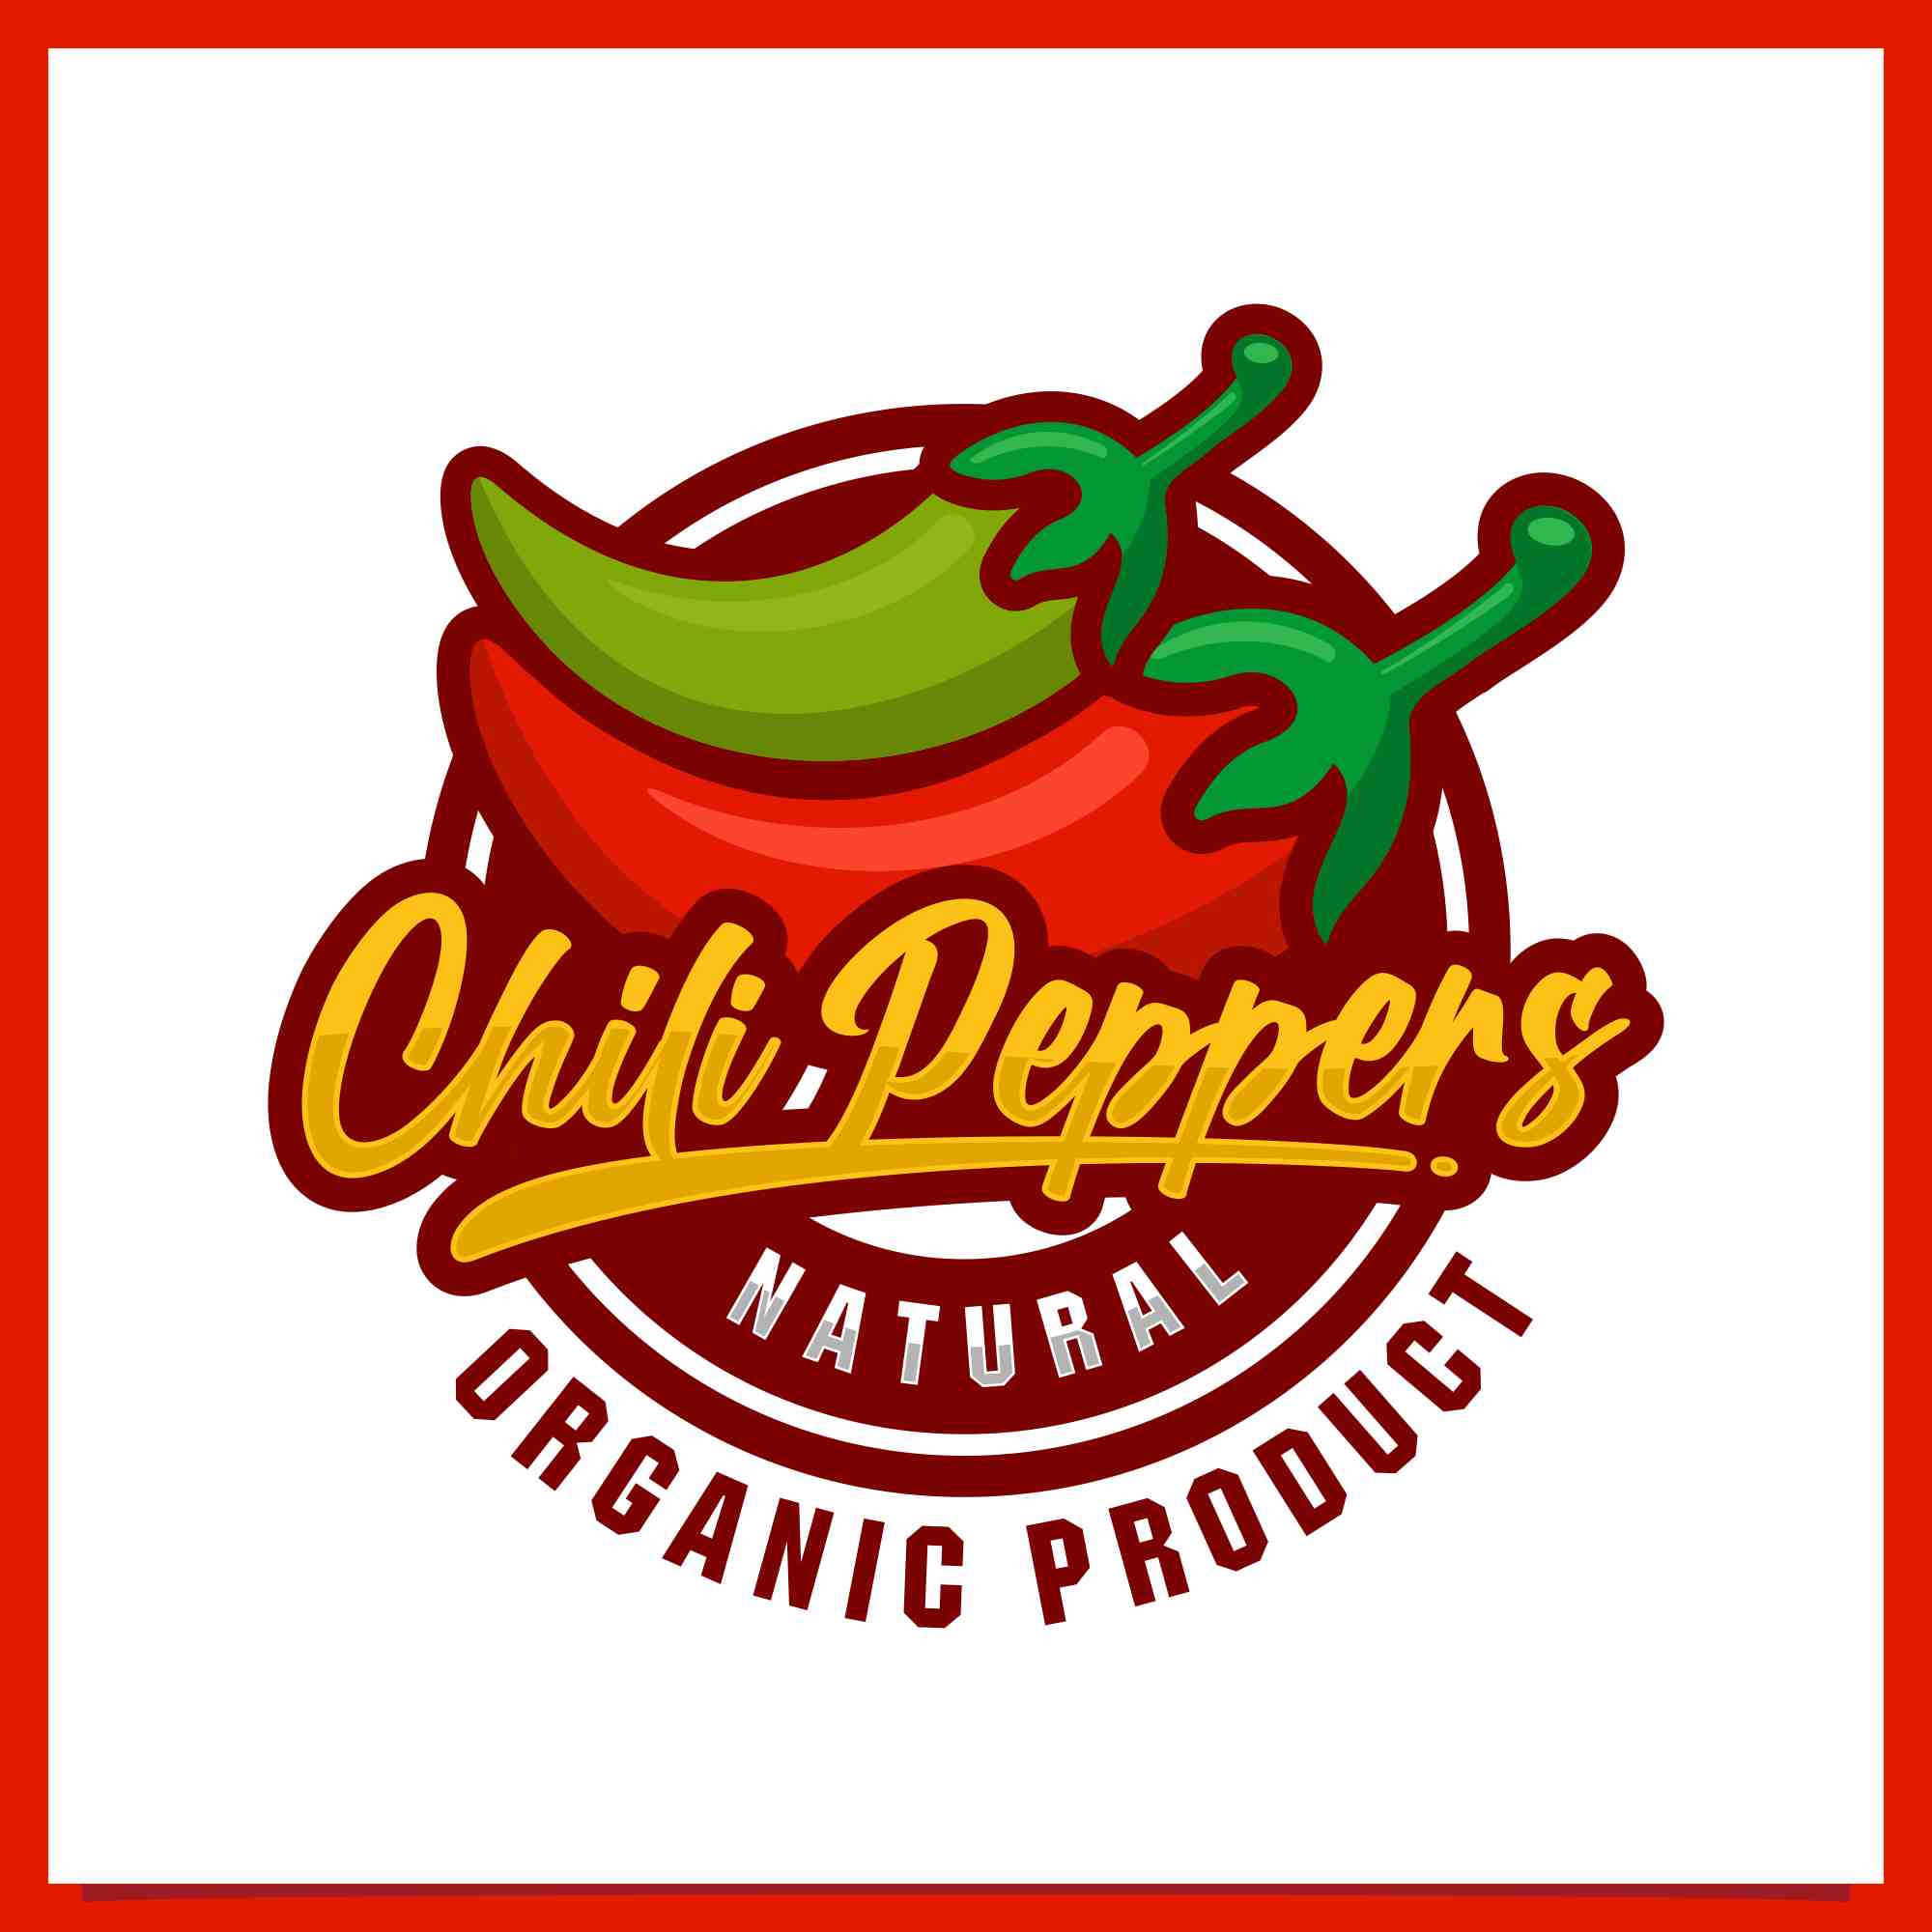 Set Chili pepper badge logo design collection - $6 preview image.